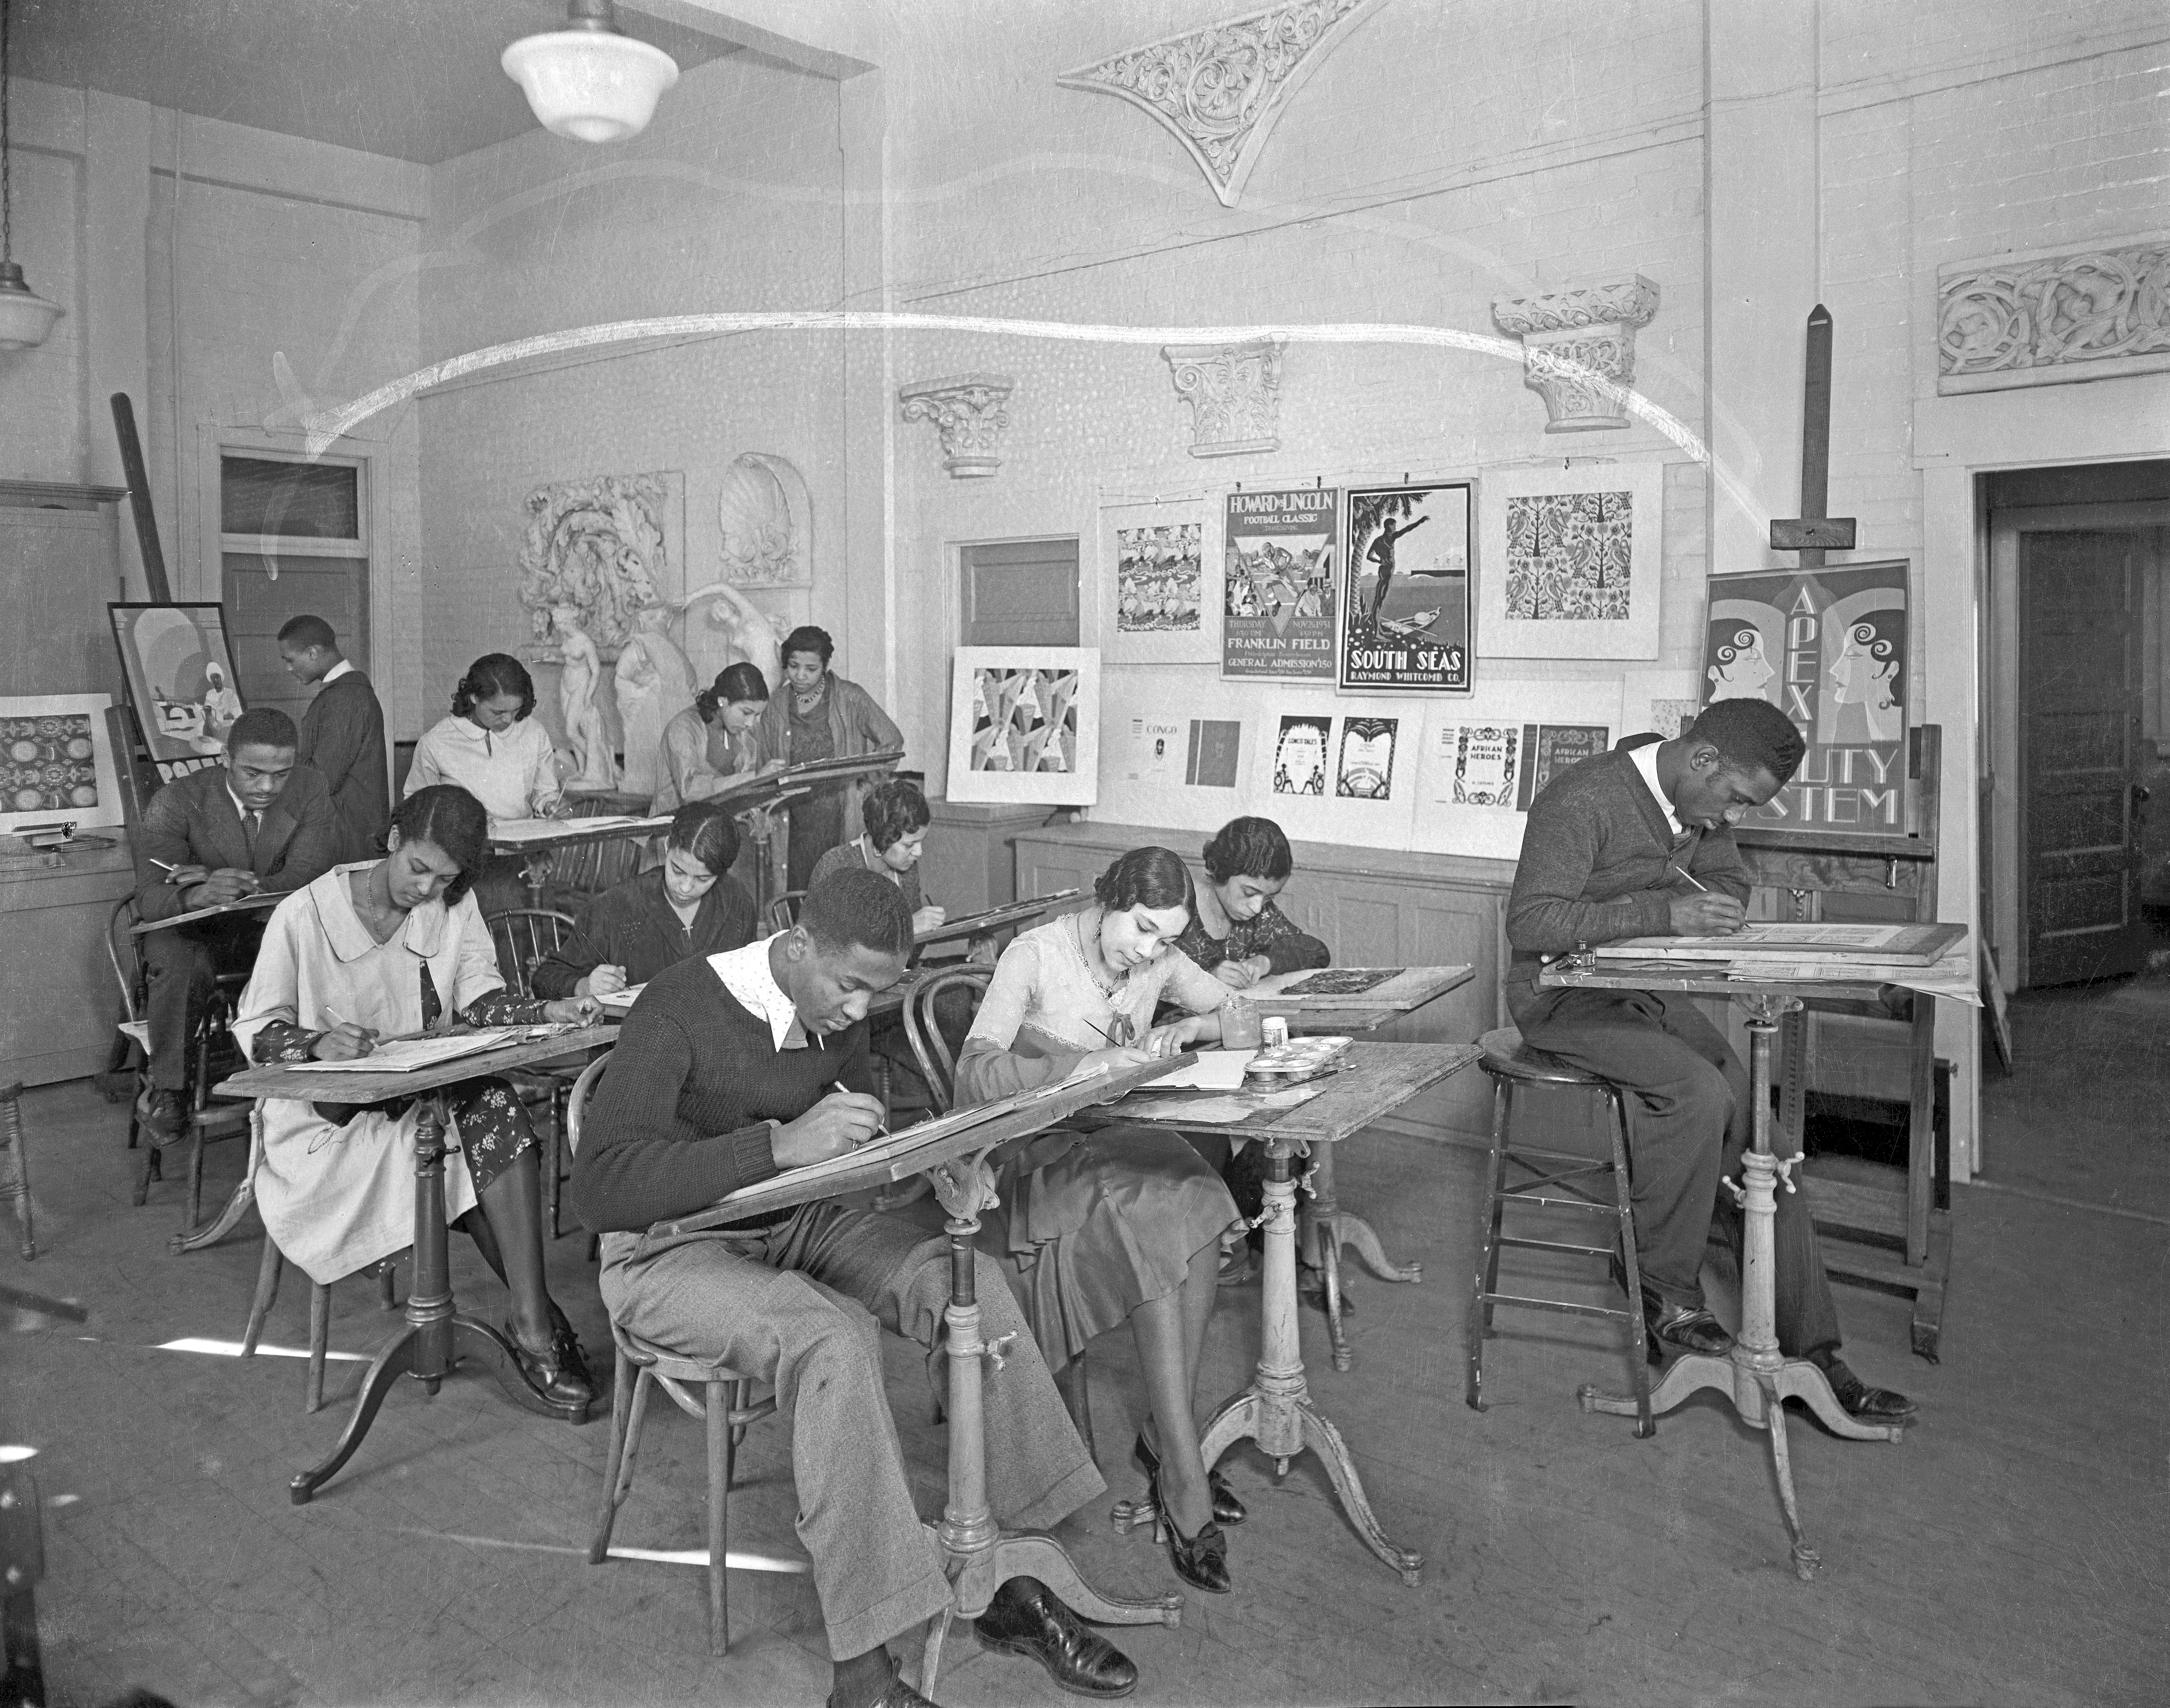 Students at their desks in a classroom looking towards the front of the room.